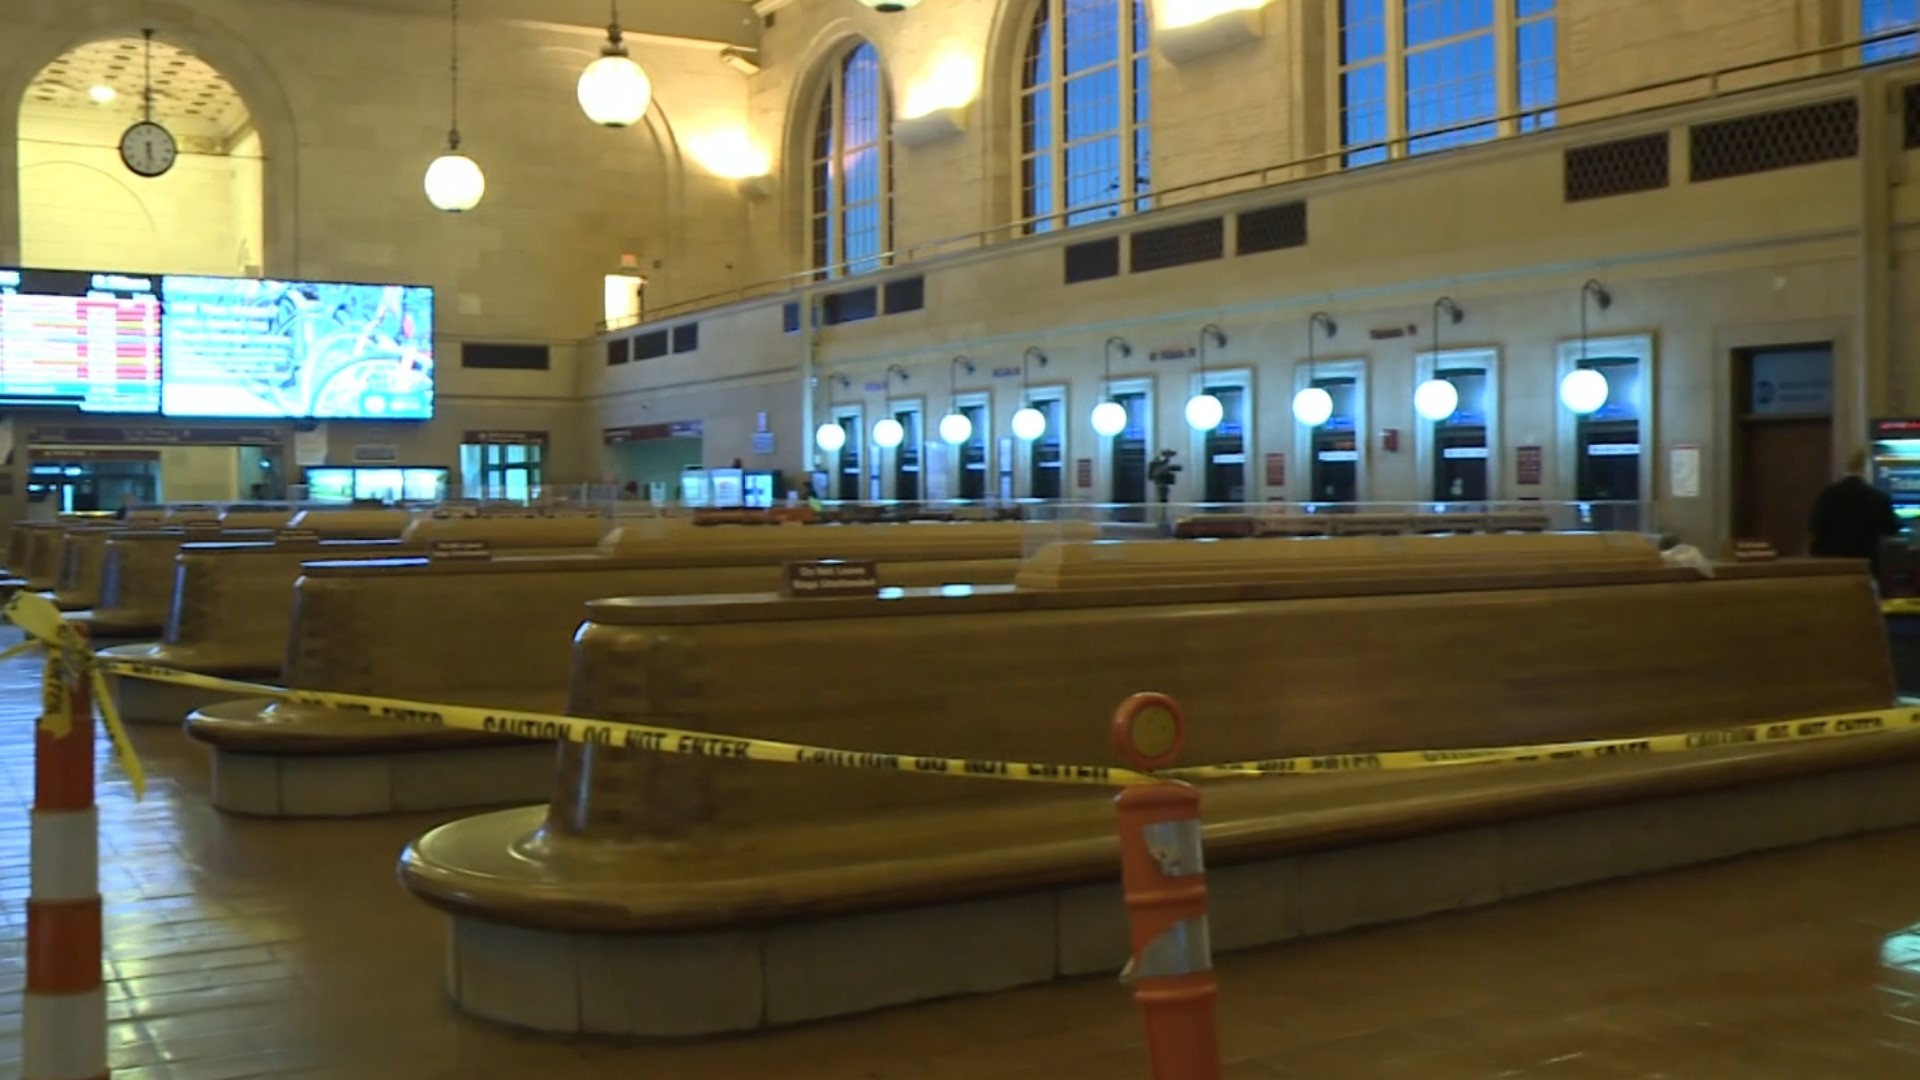 The seats at New Haven’s Union Station underwent a deep cleaning after reports of bedbugs surfaced recently. The seating areas reopened to the public Tuesday.